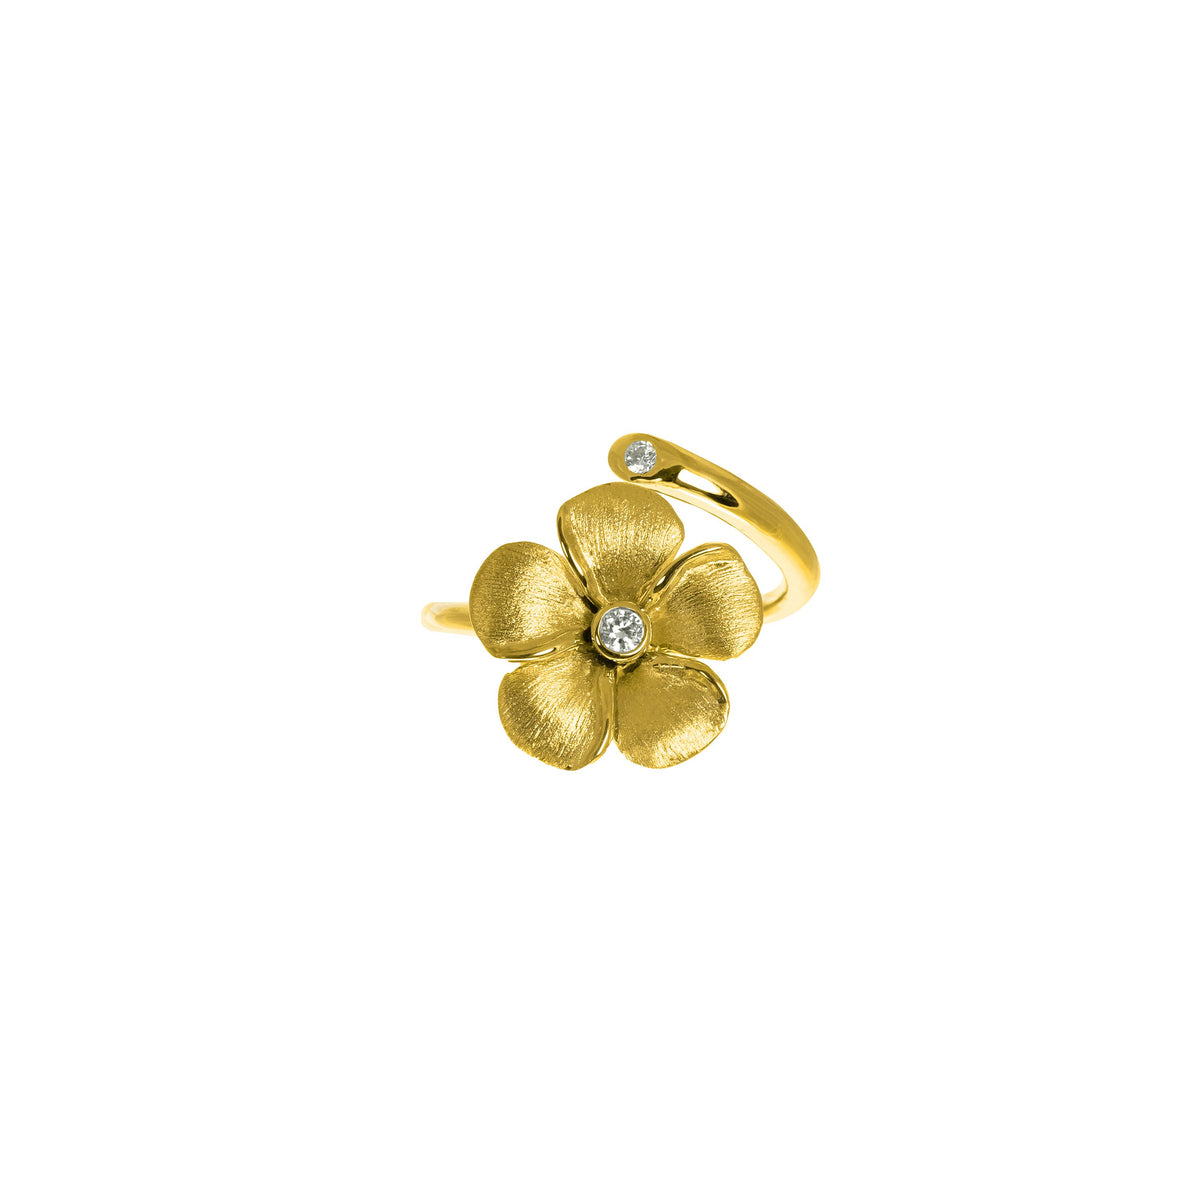 Diamond Kalachuchi Ring, Gap Style, Small, Satin and Shiny Finish (available in yellow, white, and rose gold)